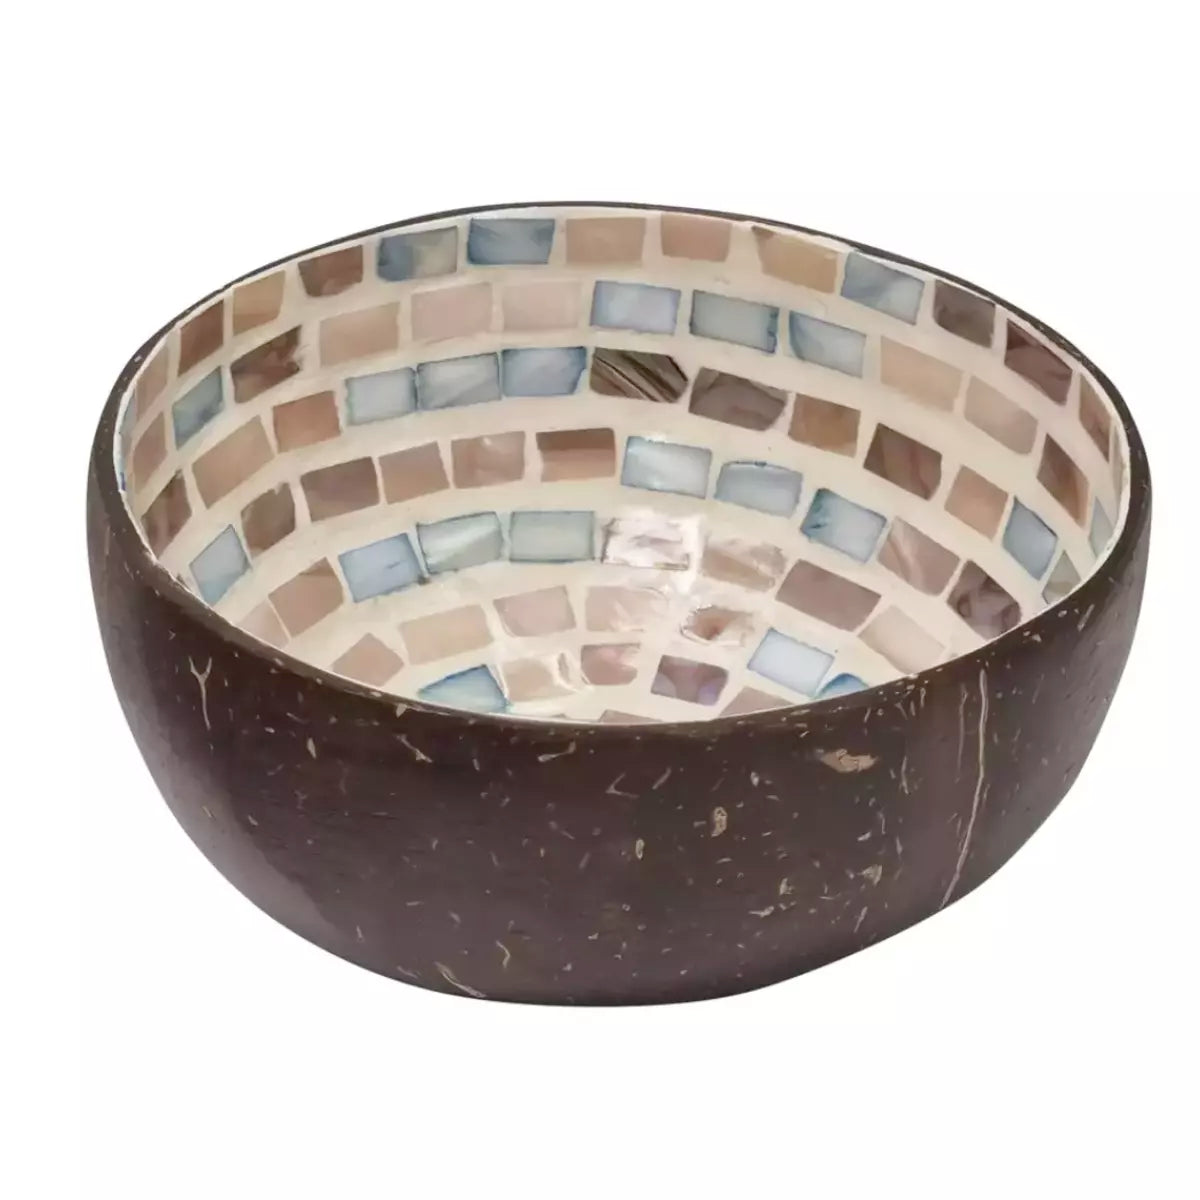 A Nacre Dashed Coconut Bowl adorned with a stunning mosaic pattern created from Nacre, also known as Mother of Pearl. (Brand: j.elliot)